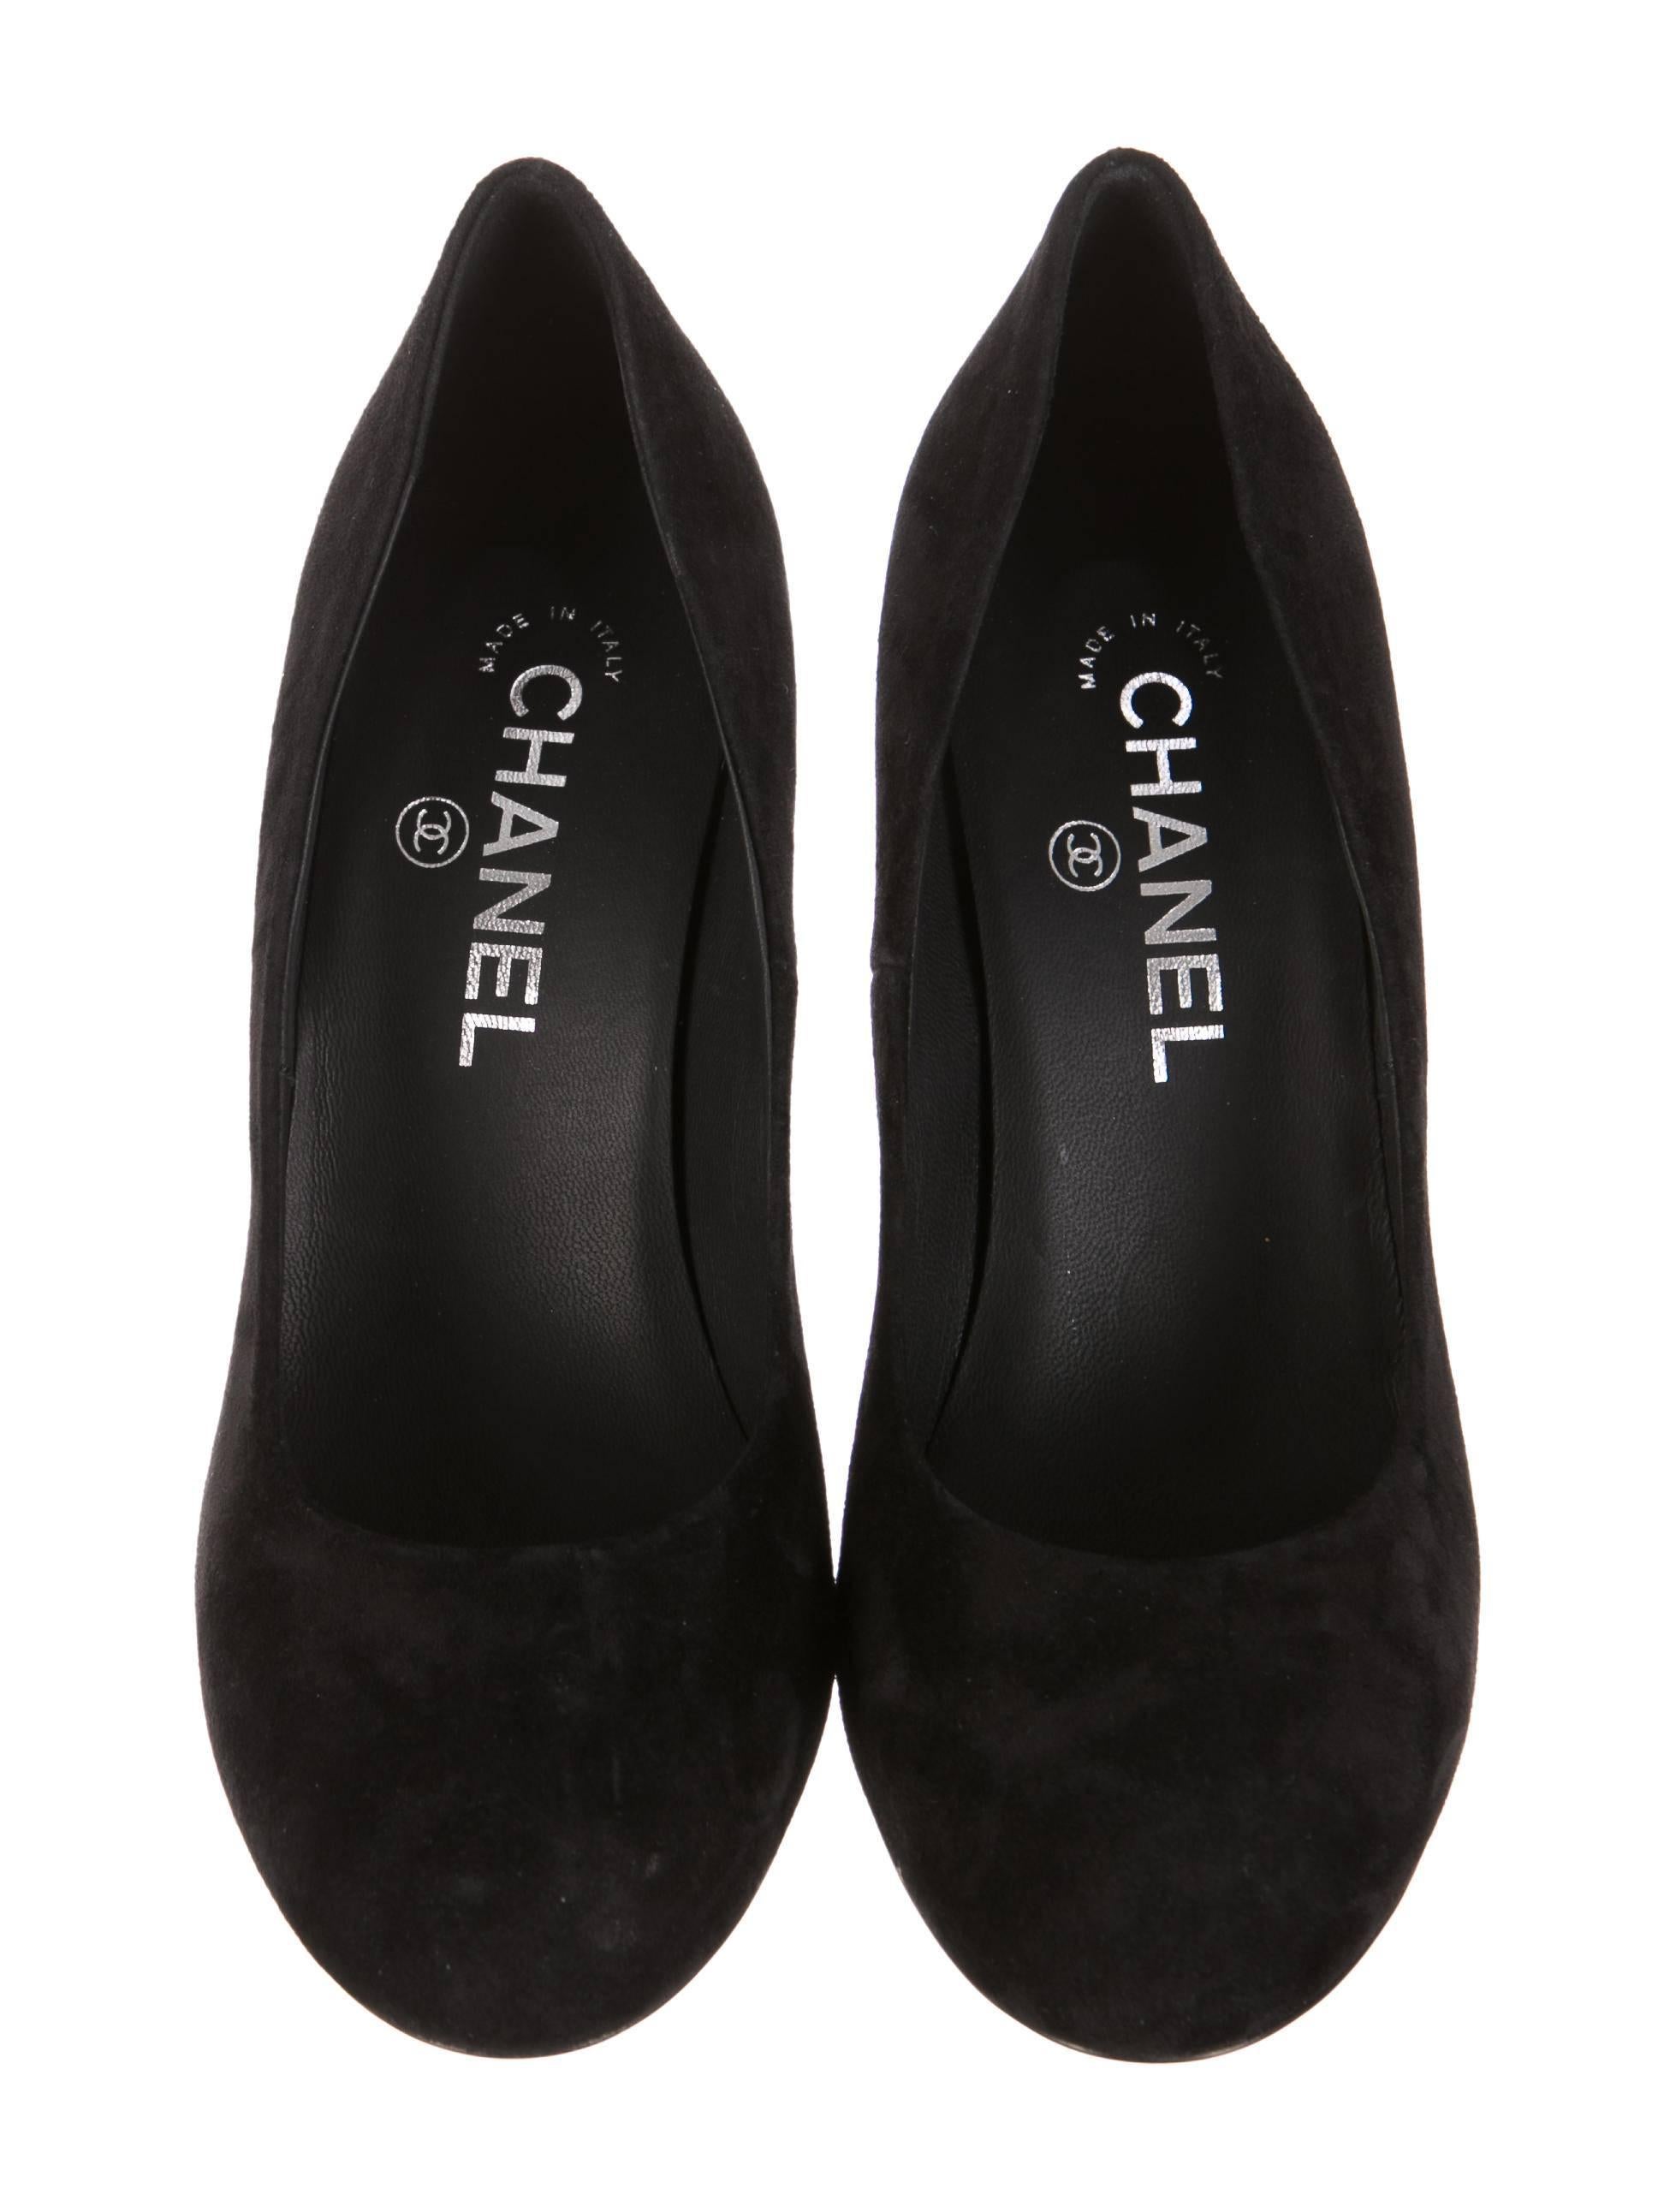 CURATOR'S NOTES

Versatile NEW black Chanel suede round-toe pumps featuring silver-tone logo cutout heels.  Priced to sell.

Includes original Chanel box and dust bag.

Retail price $1,895
Size IT 36 (US 6)
Suede
Metal heel
Heel height